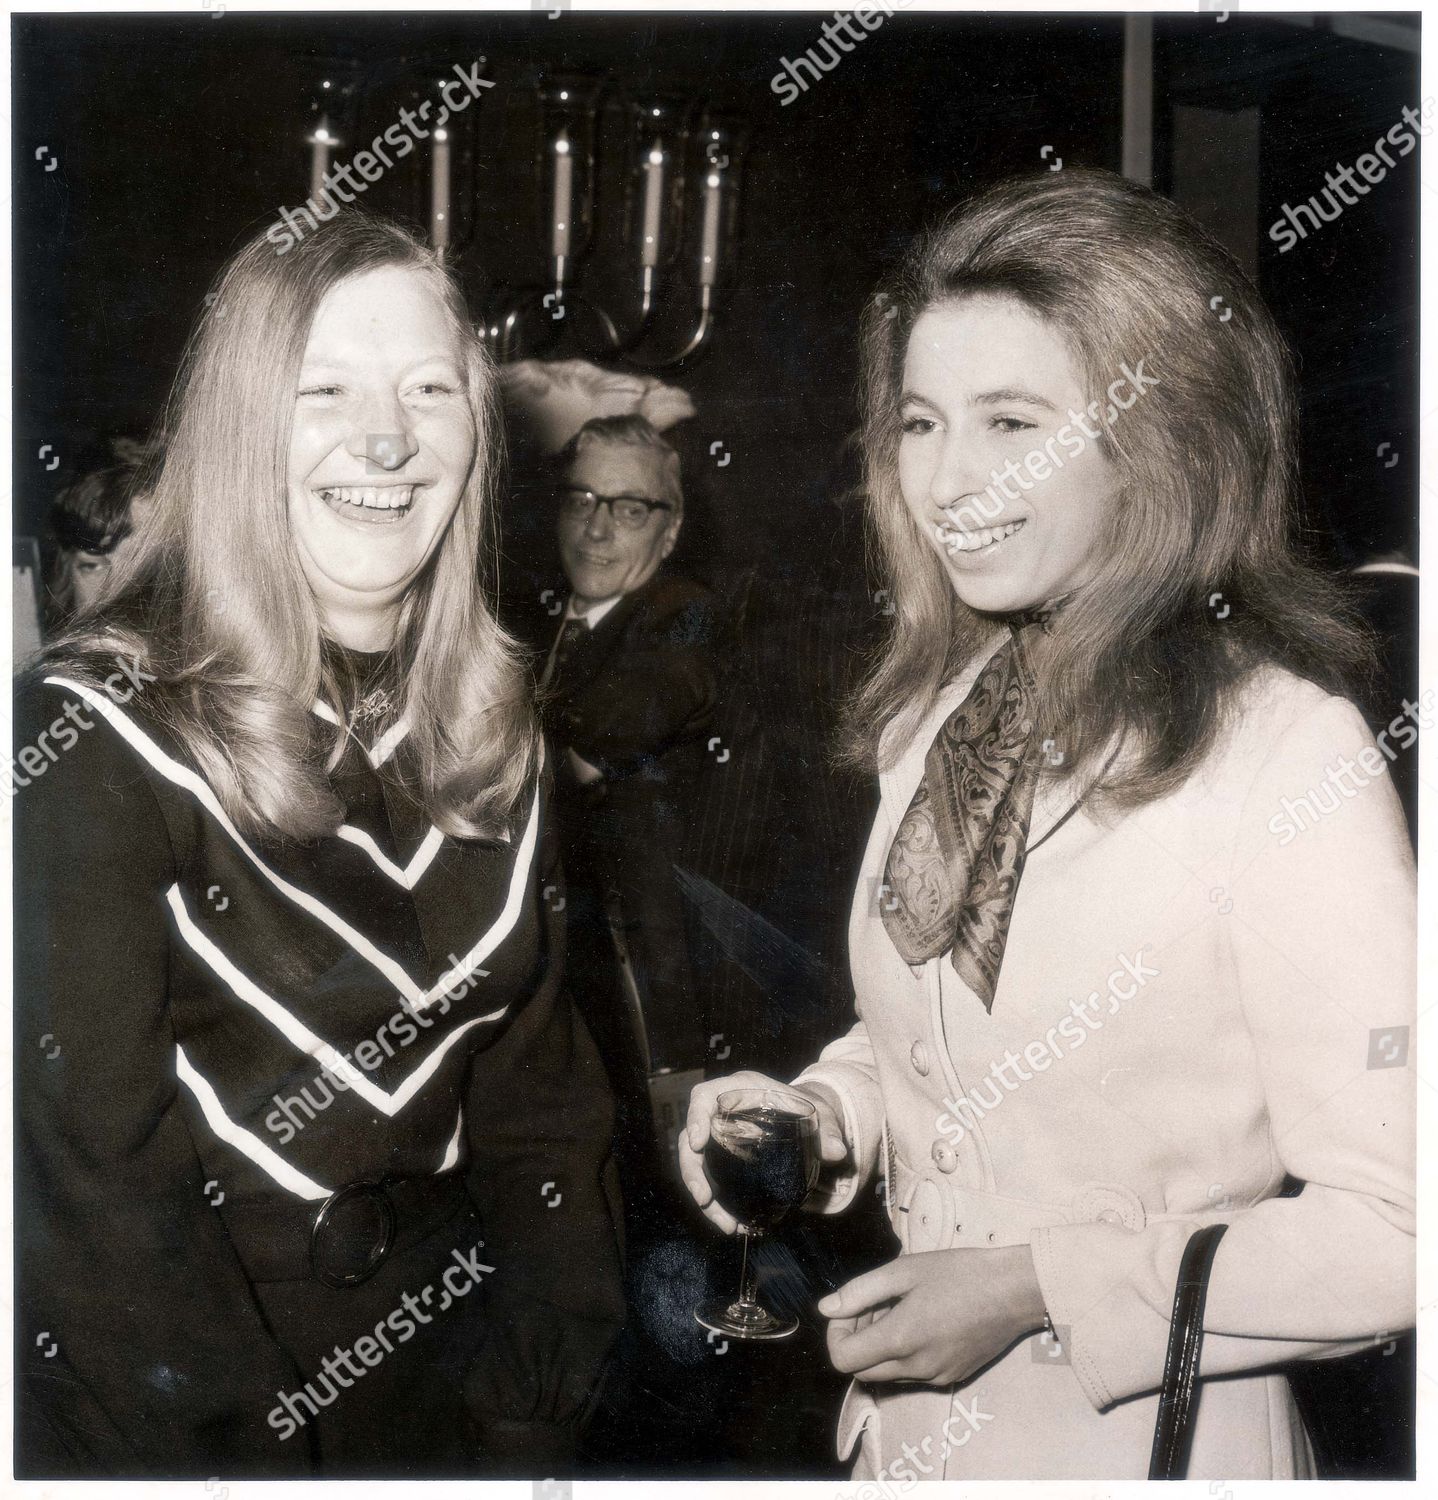 princess-anne-now-princess-royal-and-captain-mark-phillips-drinking-picture-shows-mary-peters-with-princess-anne-1972-shutterstock-editorial-892151a.jpg